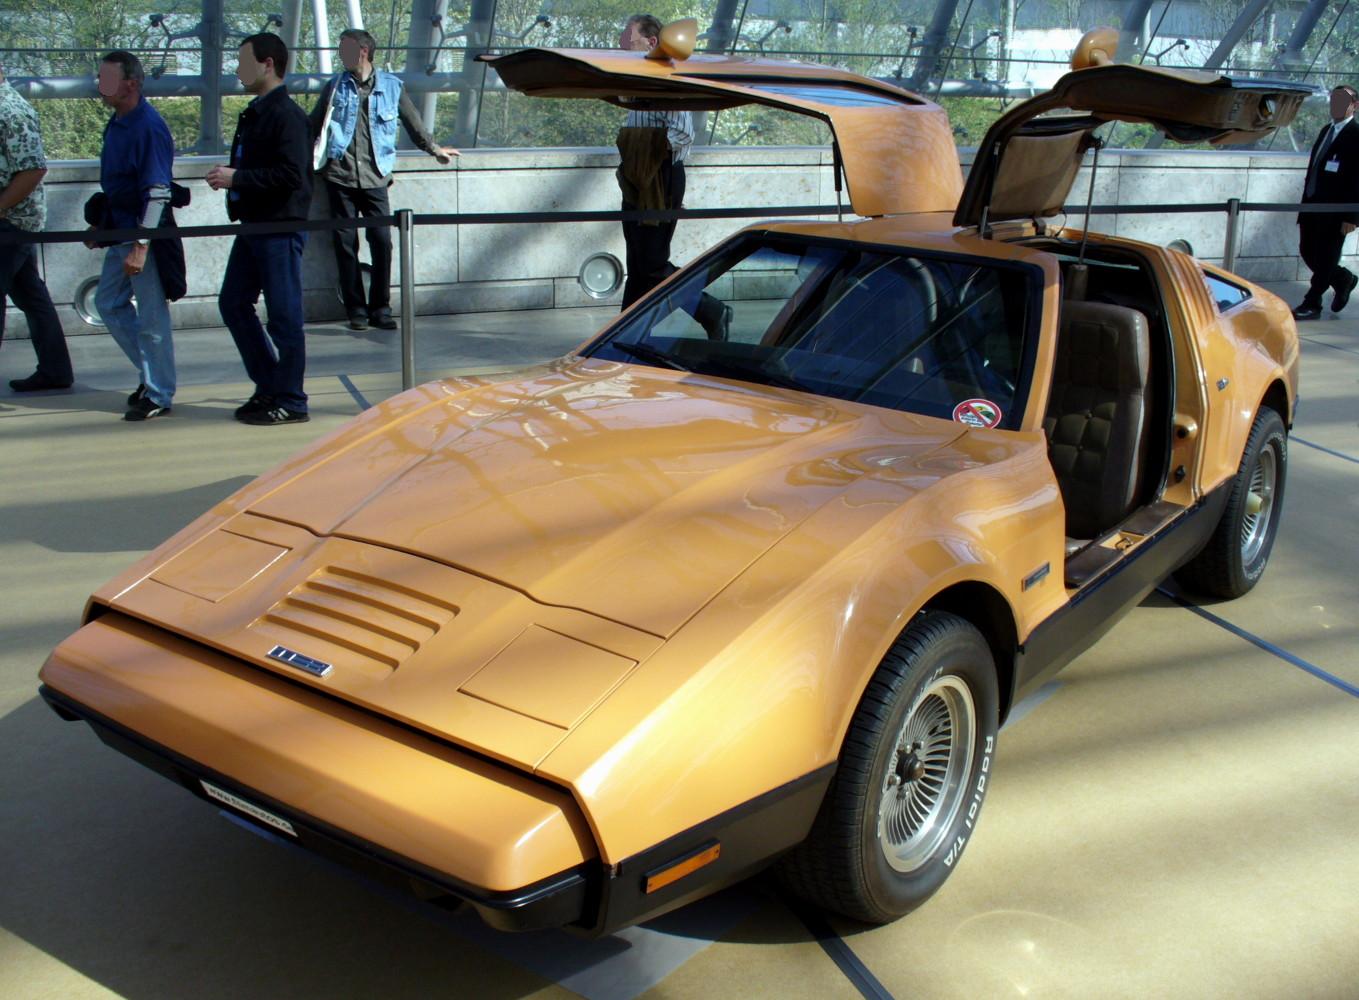 Let's open with a Bricklin SV-1